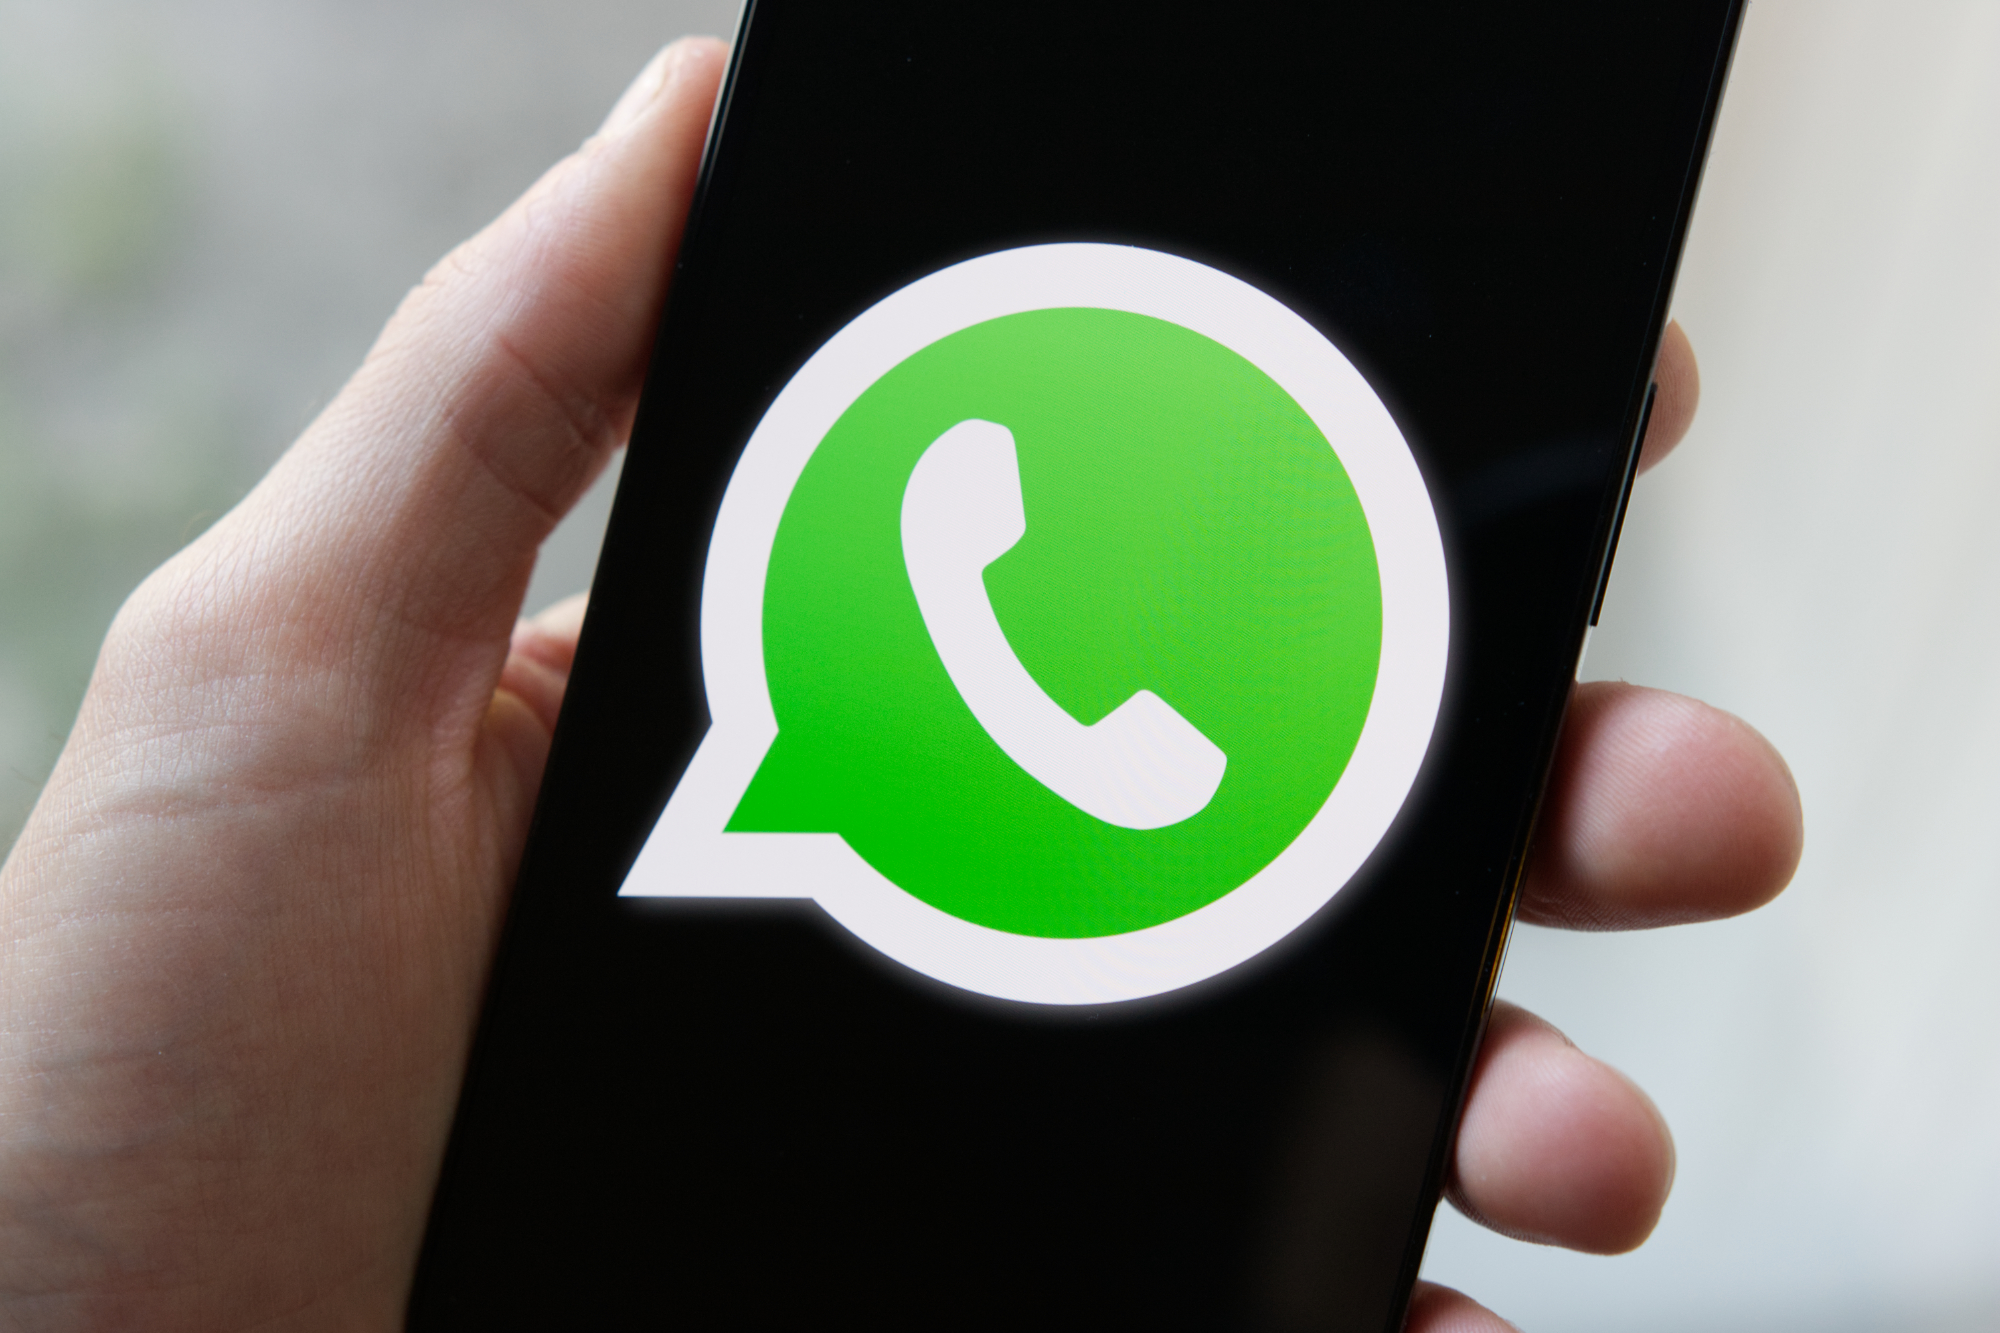 Zuckerberg makes alteration to WhatsApp, enabling users to edit sent messages.